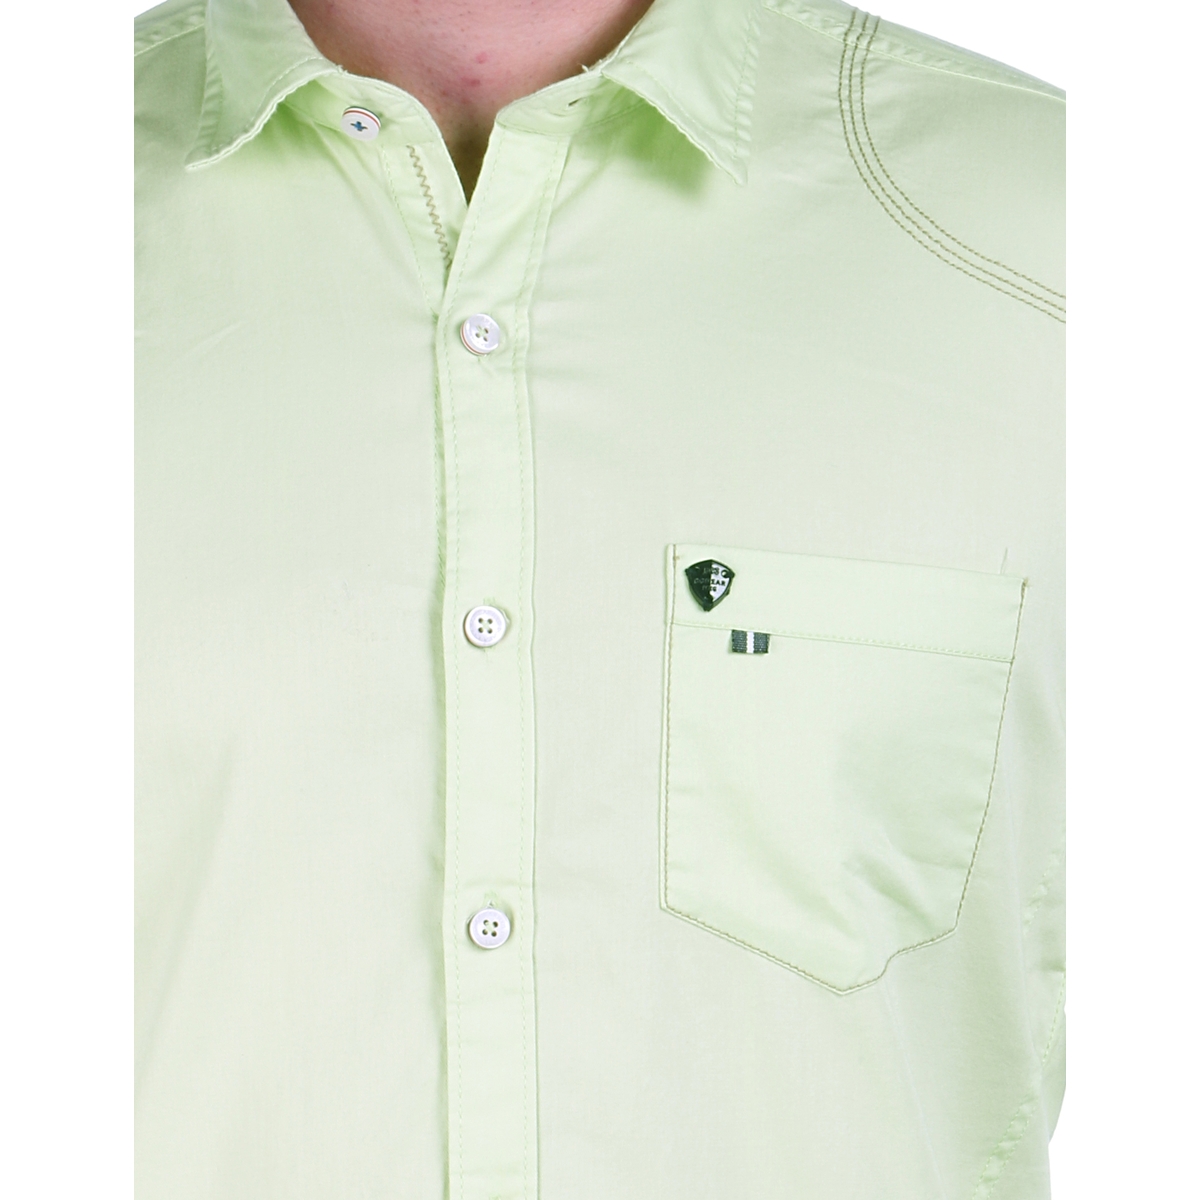 Buy Donear NXG Mint Coloured Casual Shirt Online @ ₹1699 from ShopClues